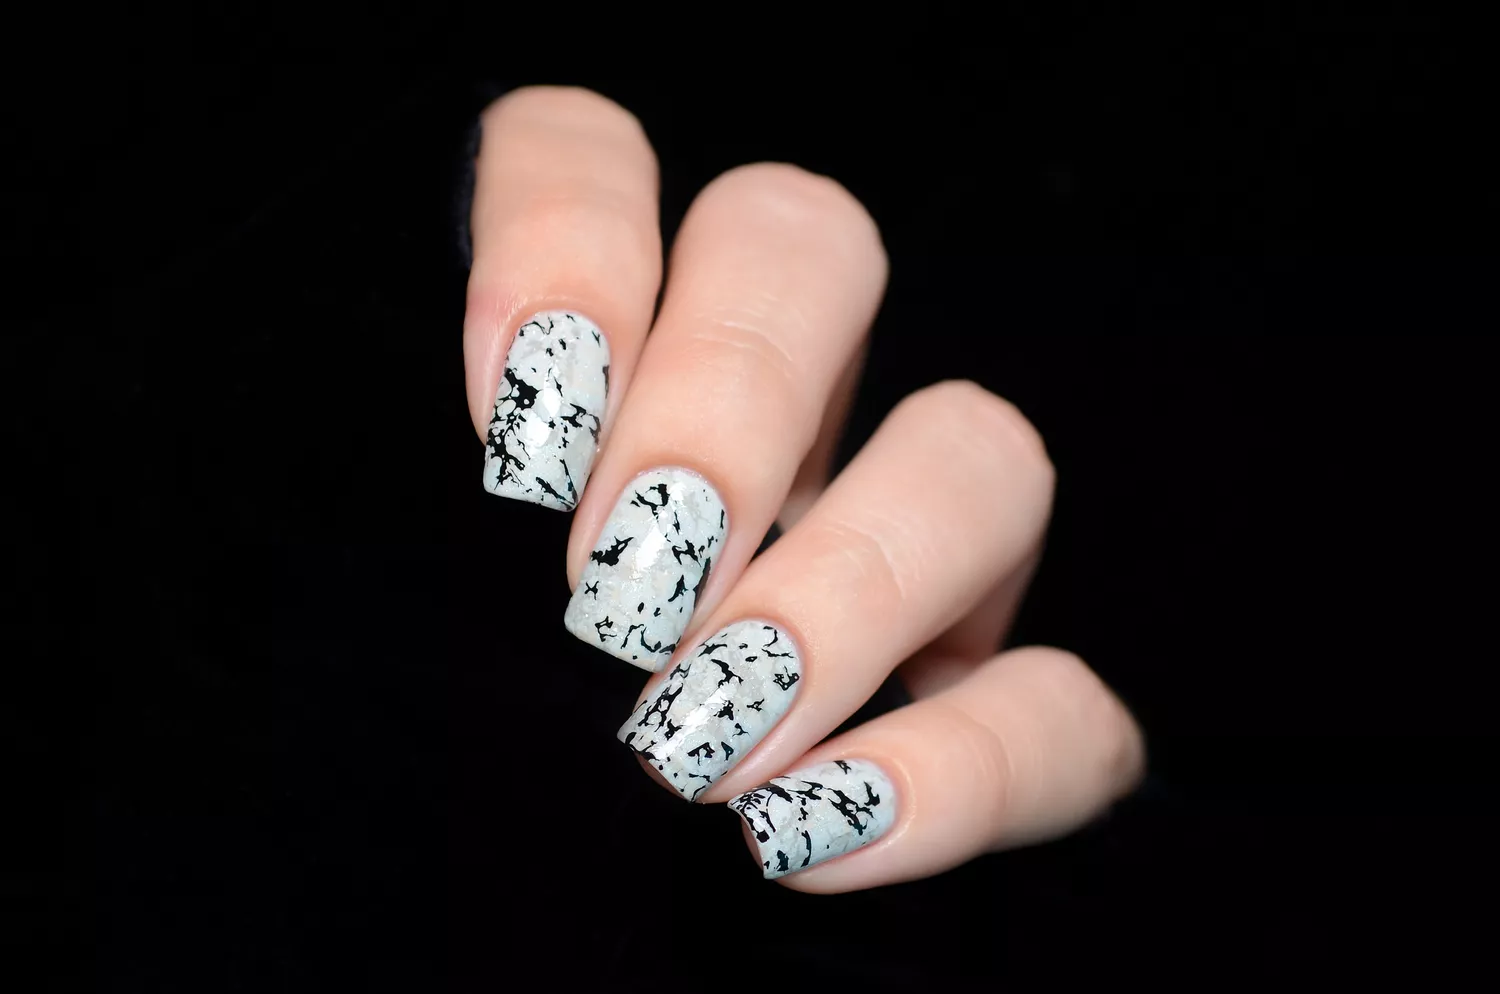 Picture showing a contrasting style of the nail design